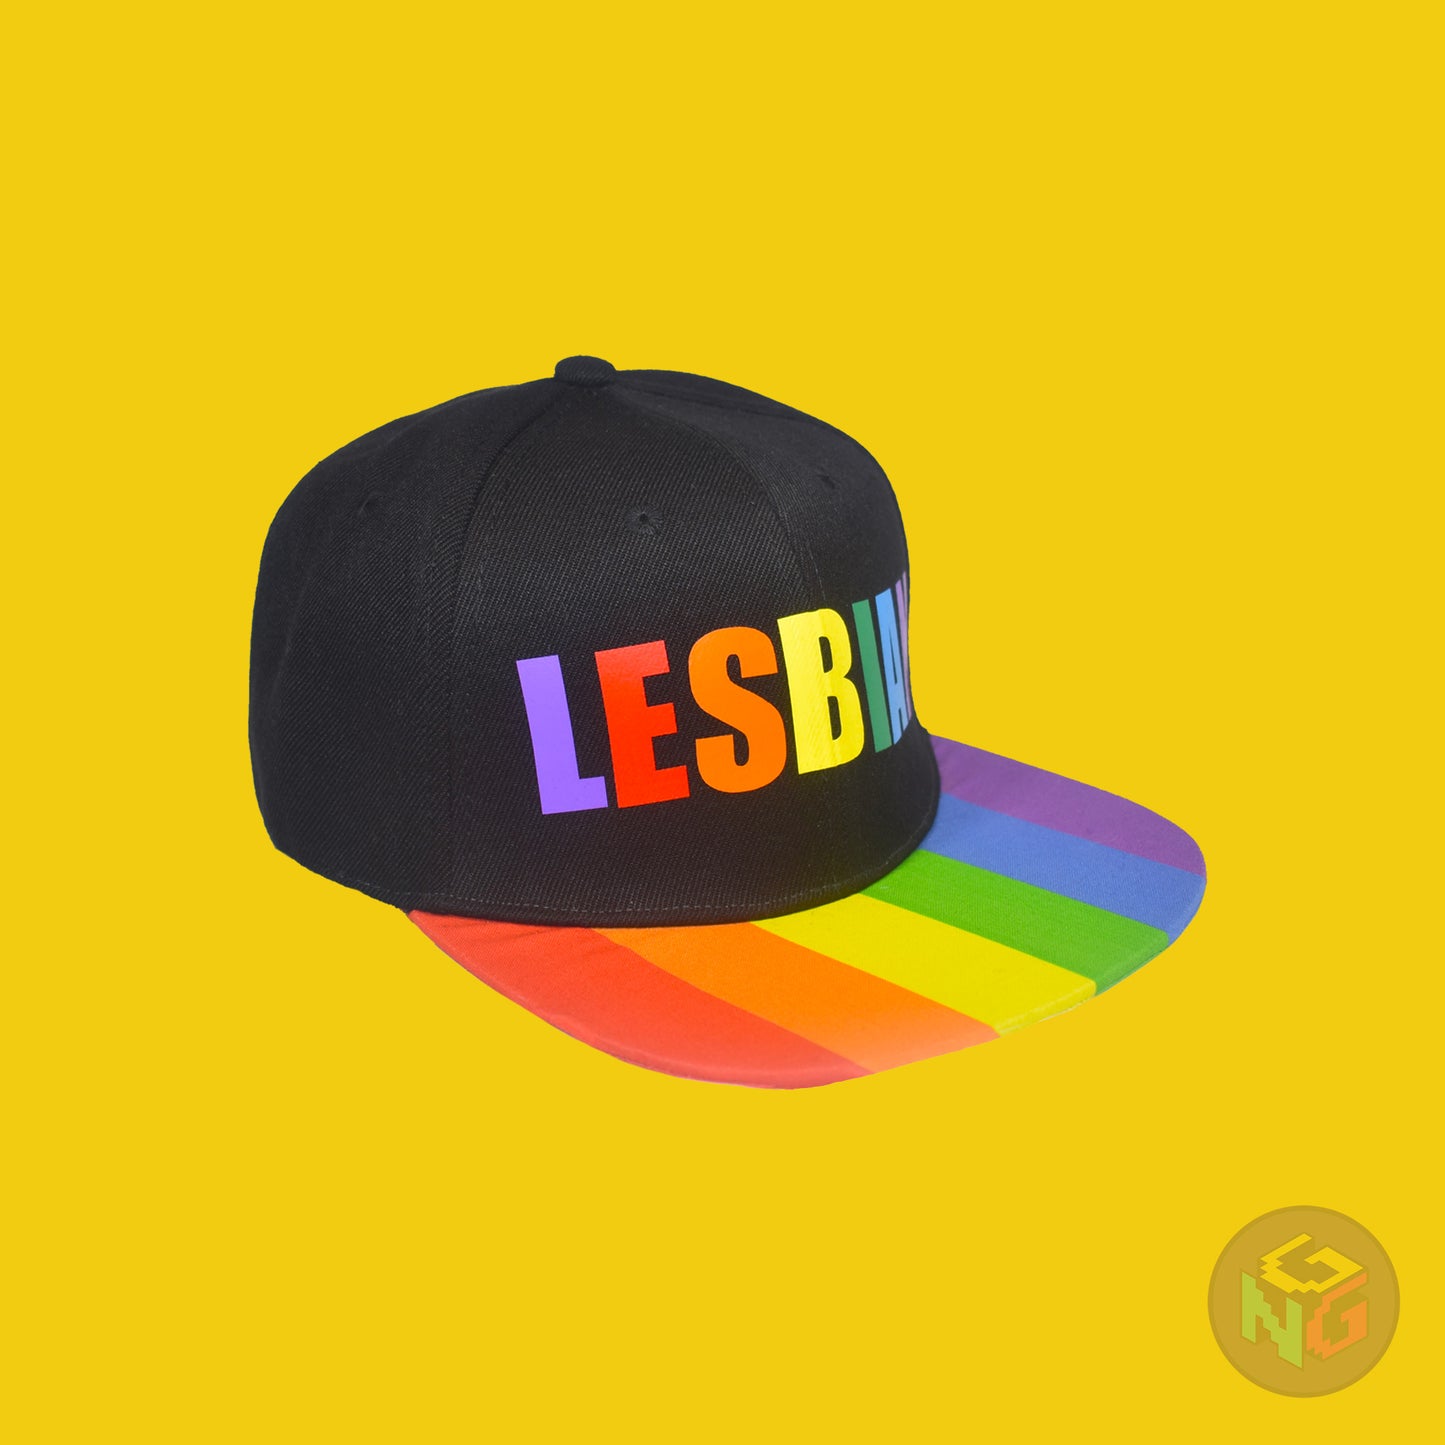 Black flat bill snapback hat. The brim has the rainbow pride flag on both sides and the front of the hat has the word “LESBIAN” in rainbow letters. Front right view